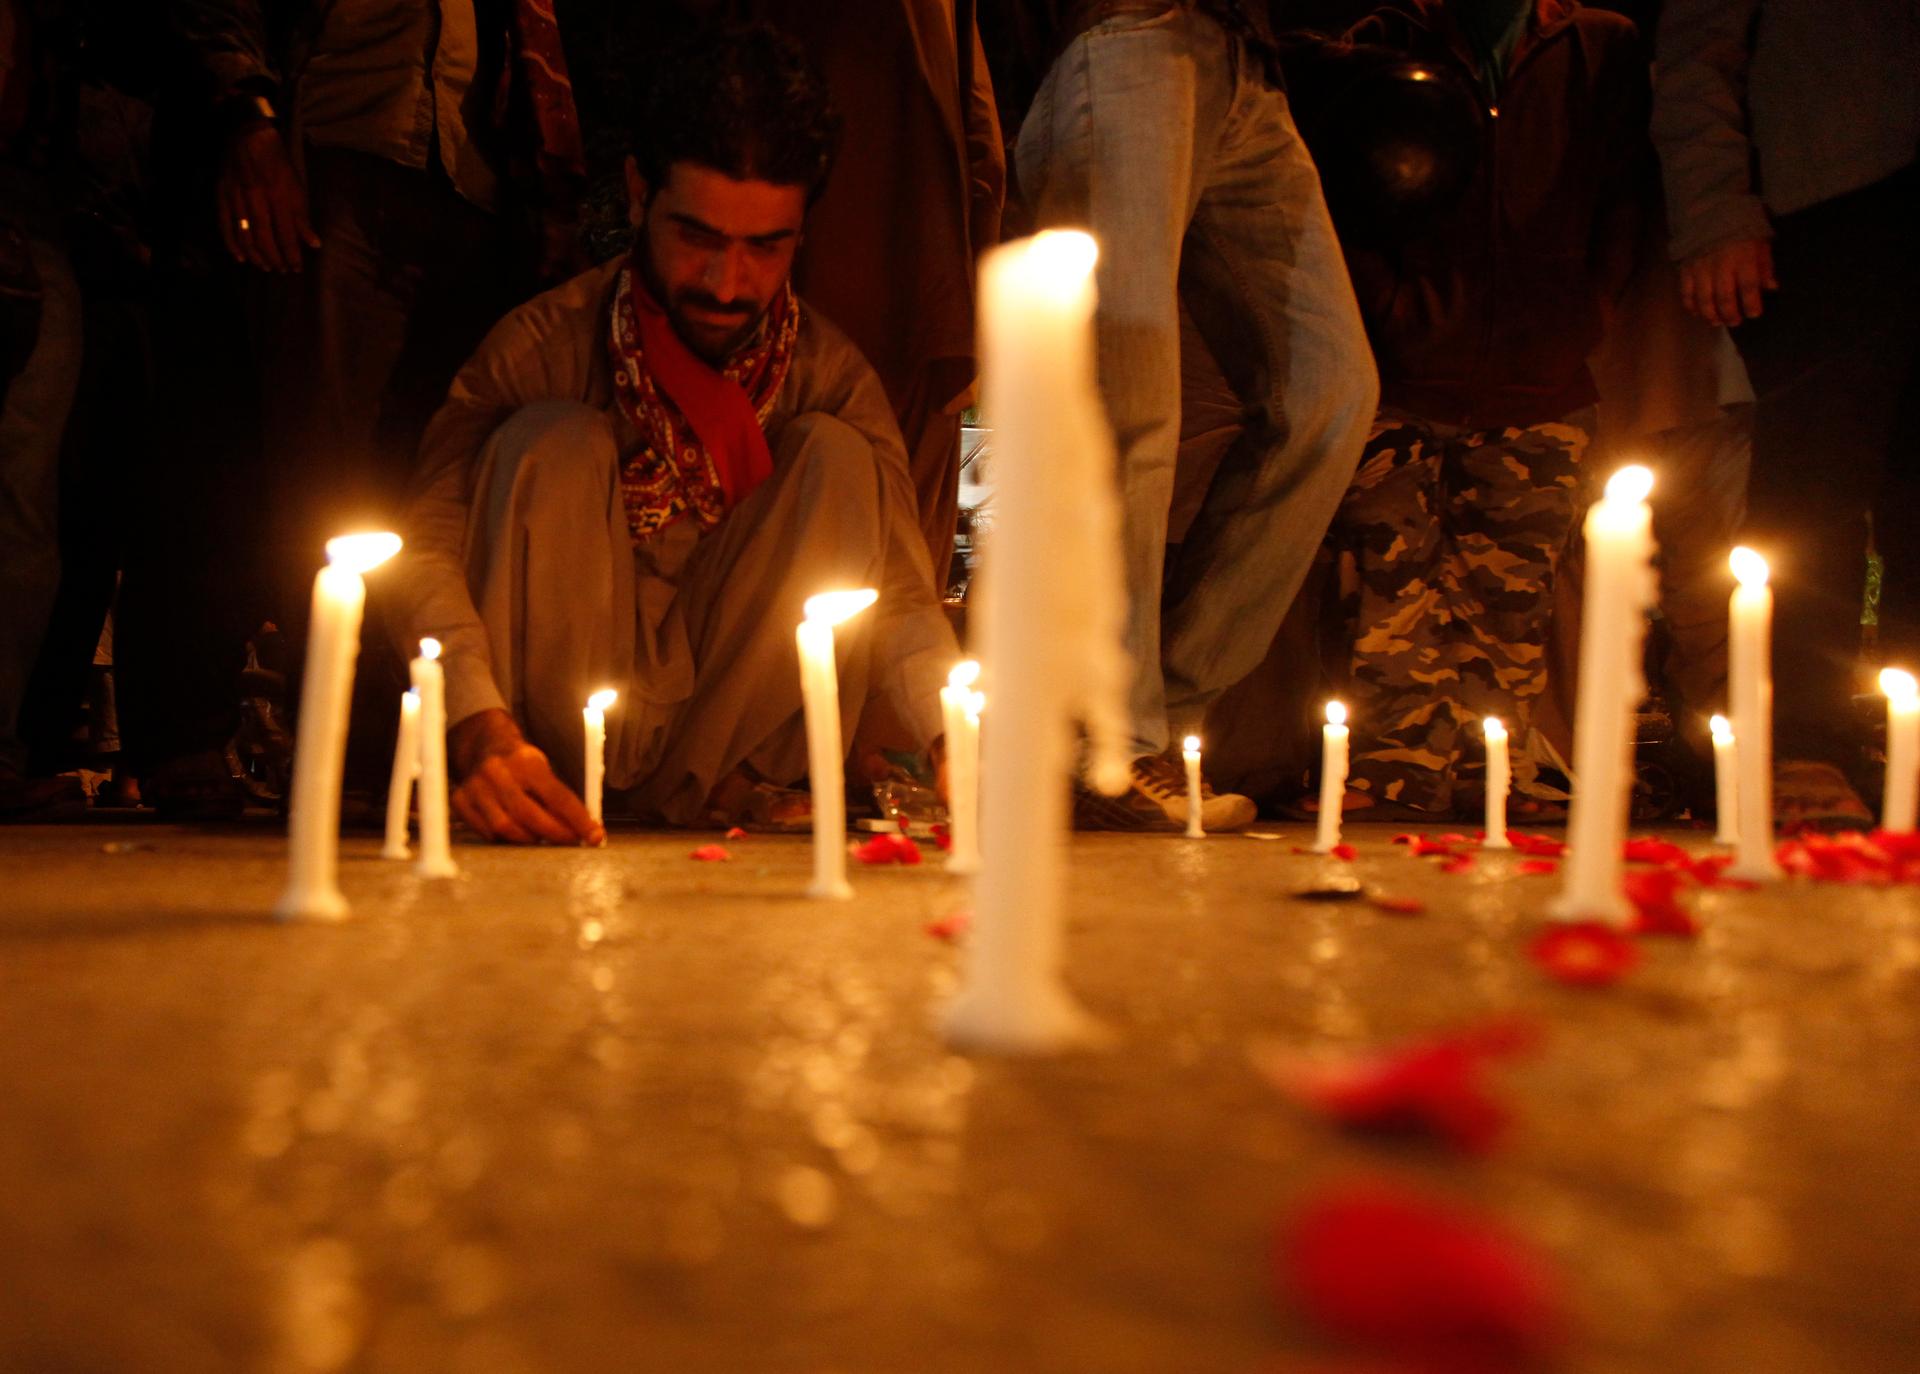 A man lights candles to mourn the victims from the Army Public School in Peshawar, which was attack by Taliban gunmen, in Karachi, December 16, 2014.